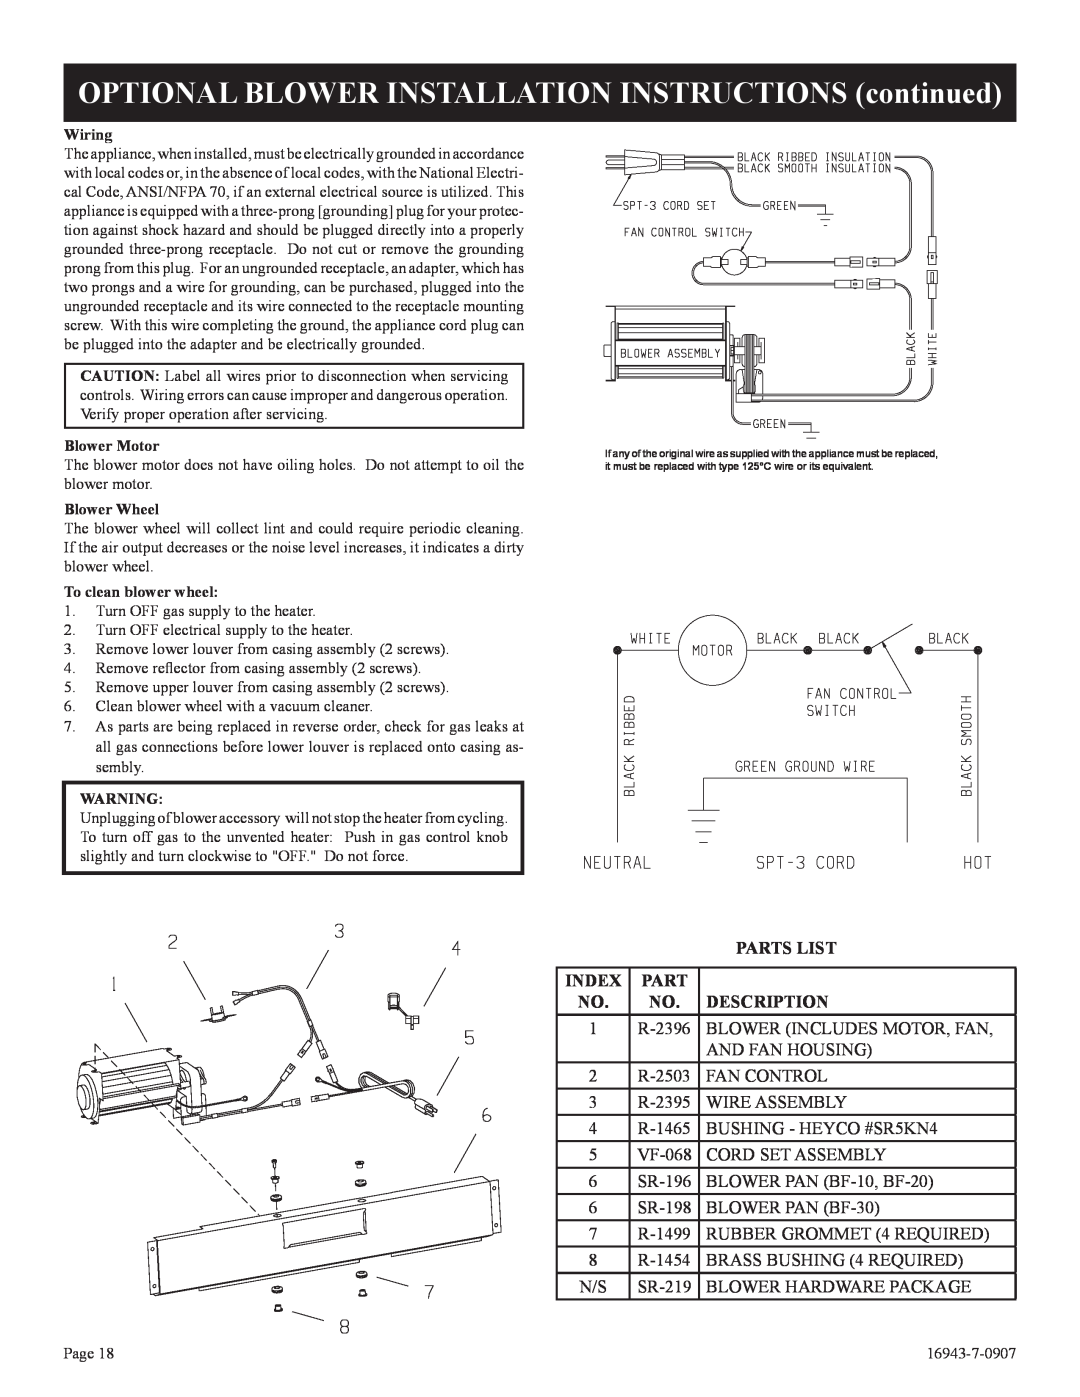 Empire Comfort Systems BF-30-2, BF-20-2, BF-10-2 installation instructions Parts List, Index, Description 